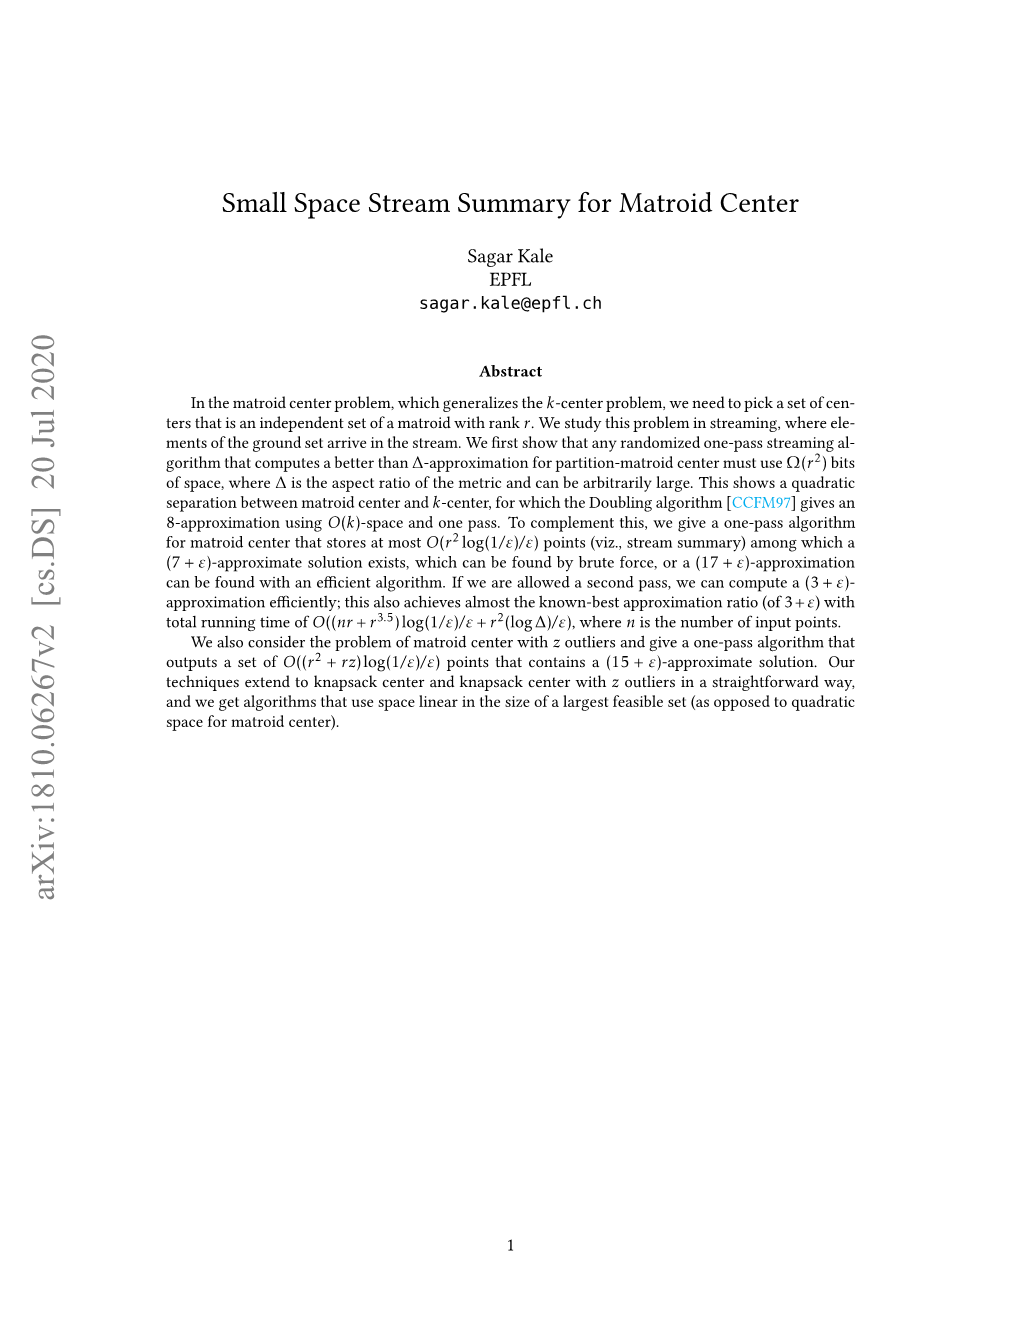 Small Space Stream Summary for Matroid Center